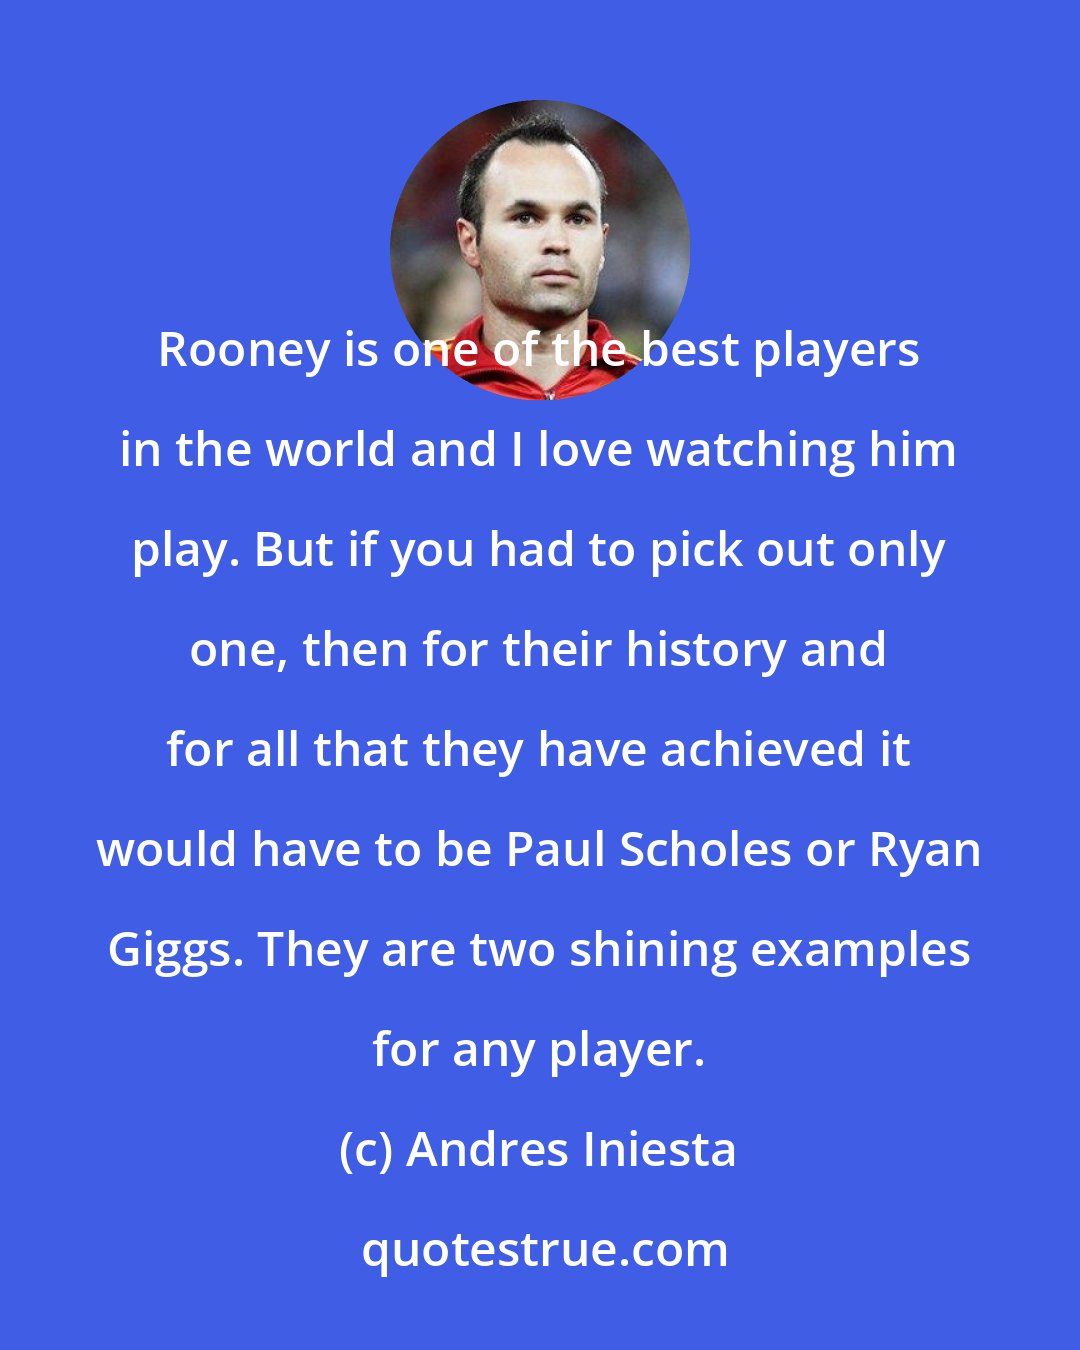 Andres Iniesta: Rooney is one of the best players in the world and I love watching him play. But if you had to pick out only one, then for their history and for all that they have achieved it would have to be Paul Scholes or Ryan Giggs. They are two shining examples for any player.